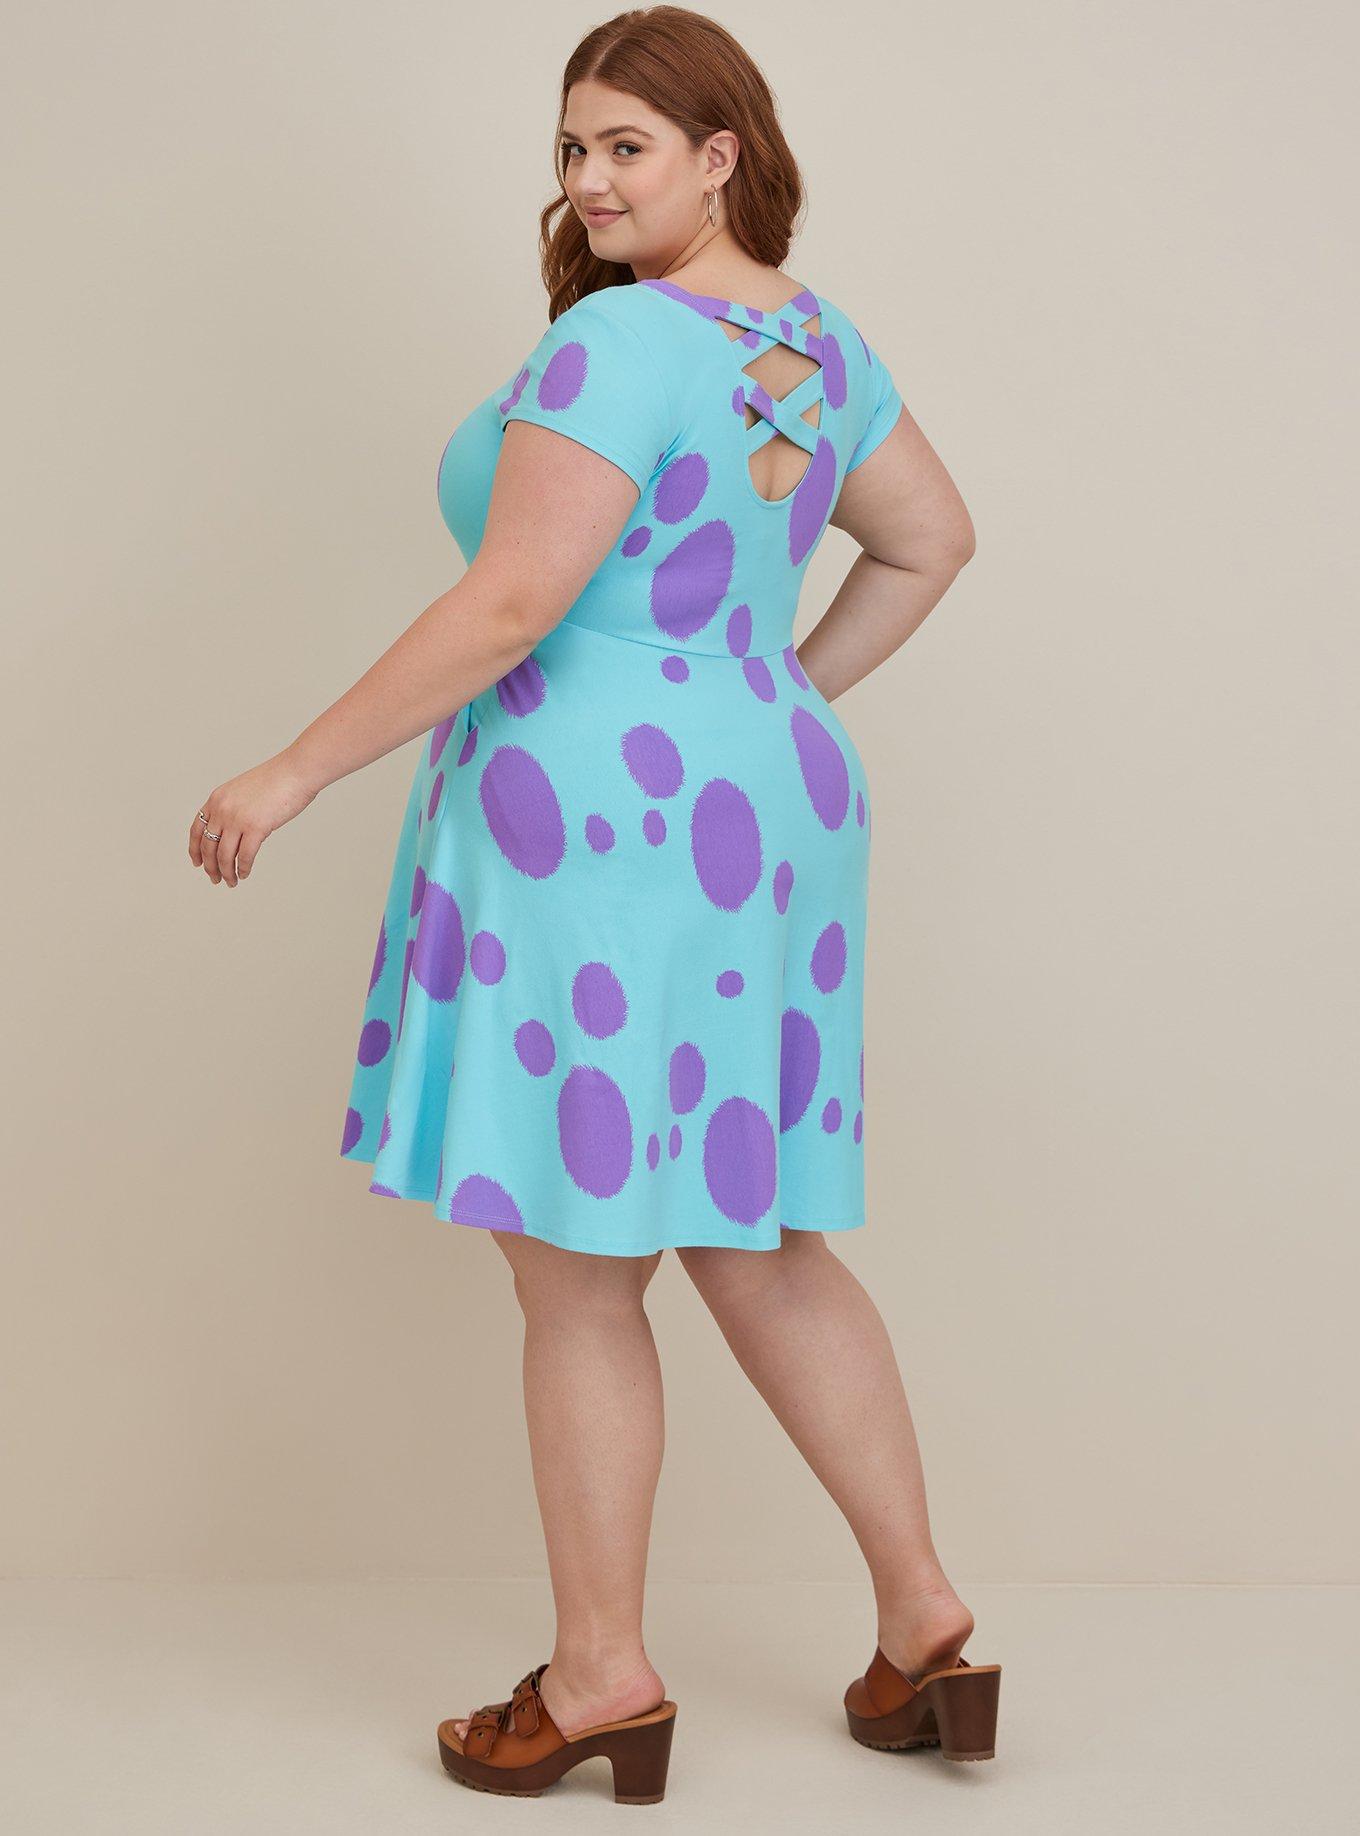 Sully Monsters Inc Dress -  Finland